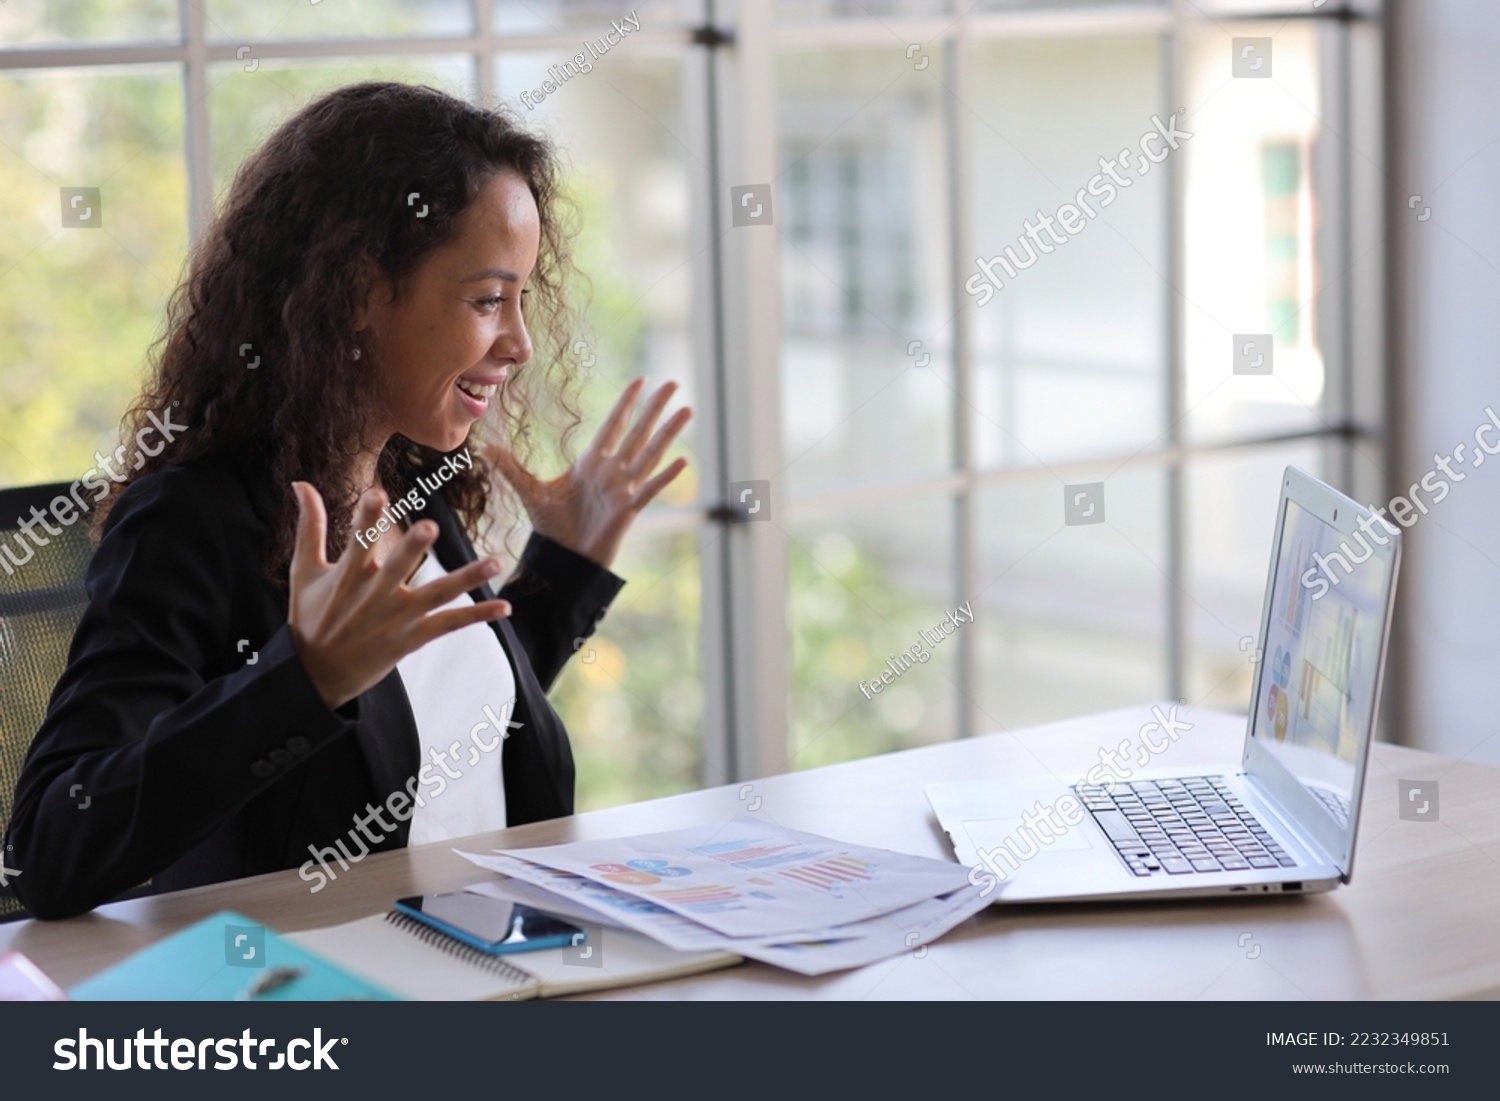 Attractive professional latin female employee worker sitting, using laptop computer with smart mobile phone at home workplace. Businesswoman working on paperwork while looking at camera and smile #2232349851